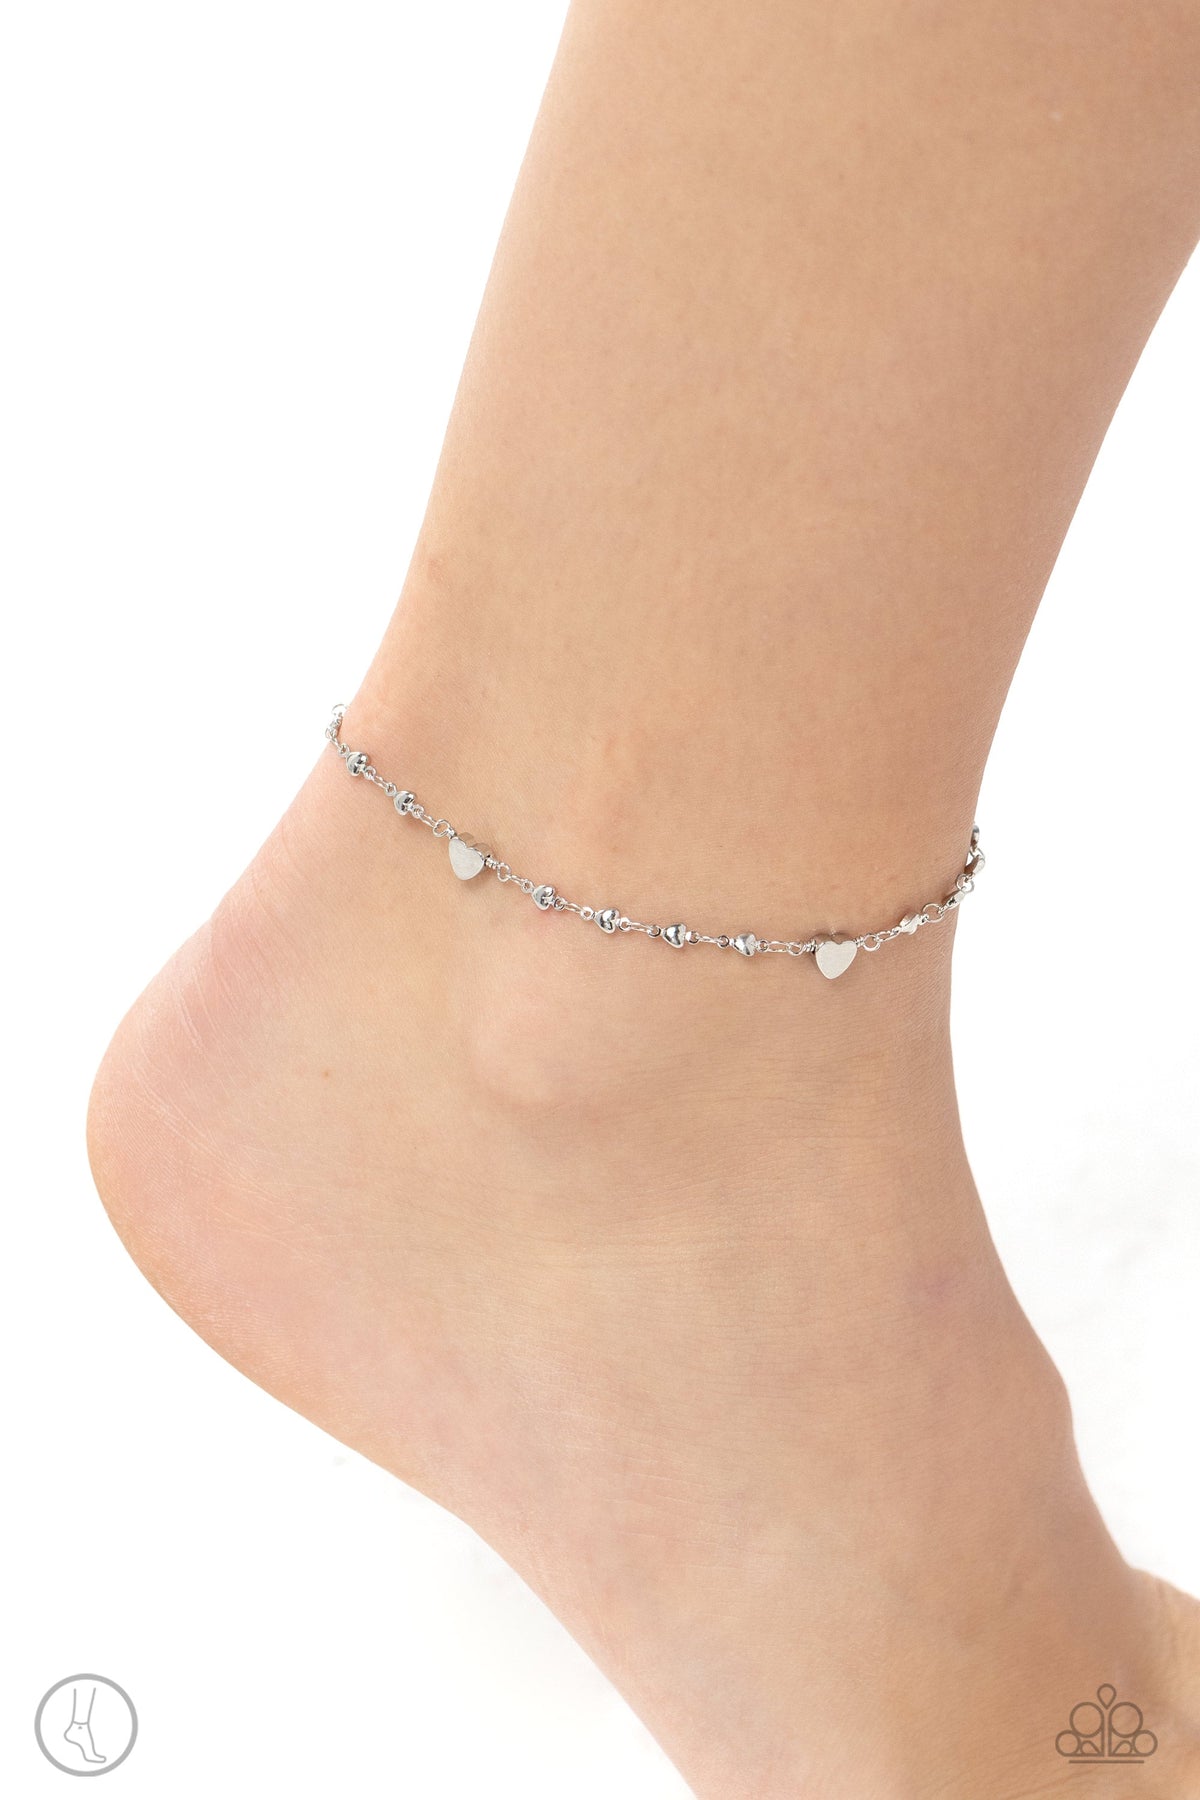 Highlighting My Heart Silver Anklet - Paparazzi Accessories-on model - CarasShop.com - $5 Jewelry by Cara Jewels